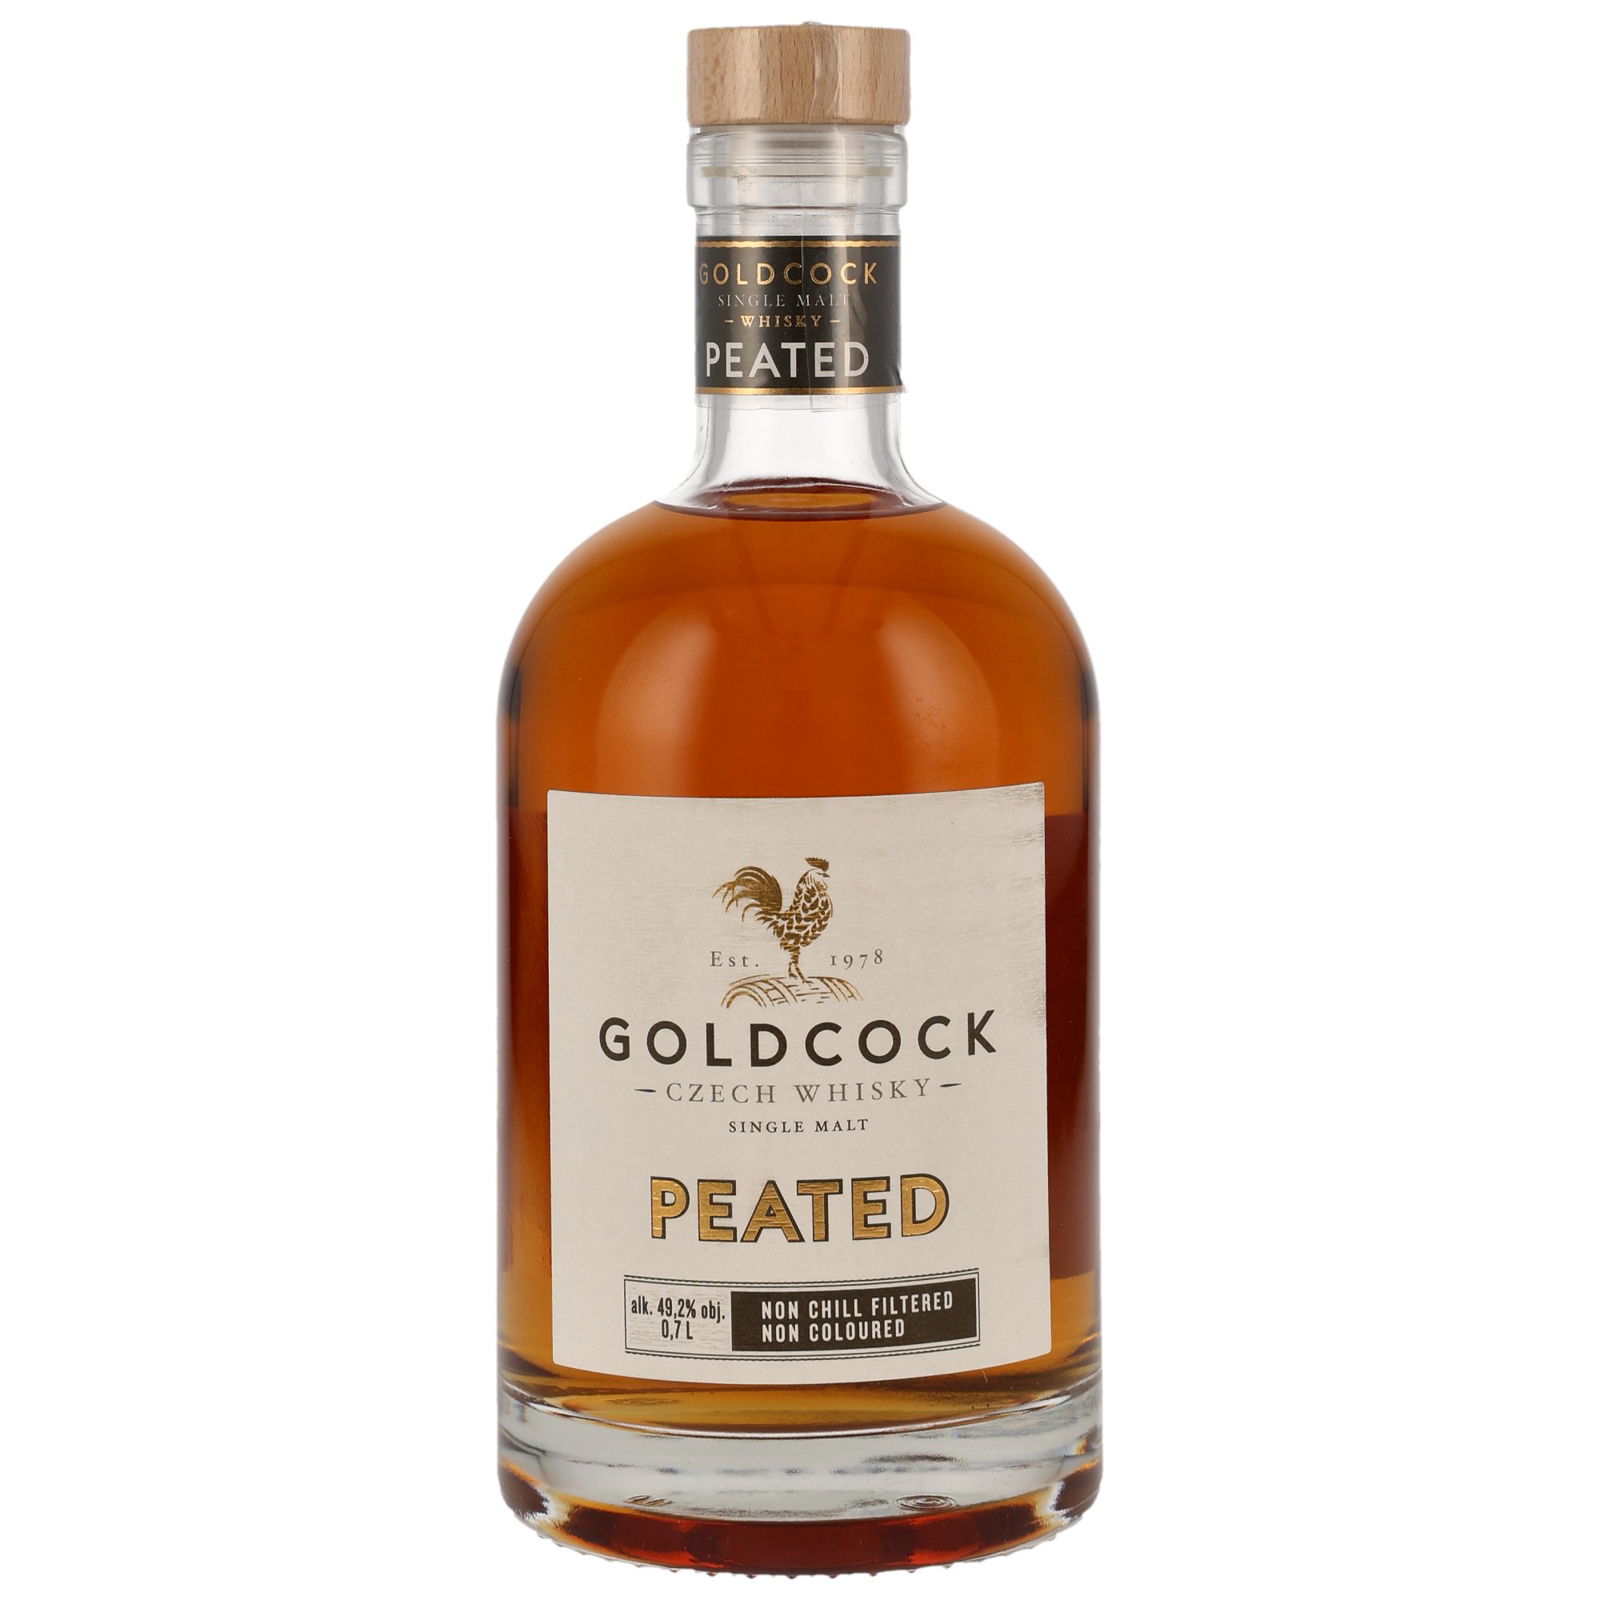 Goldcock Peated Czech Whisky